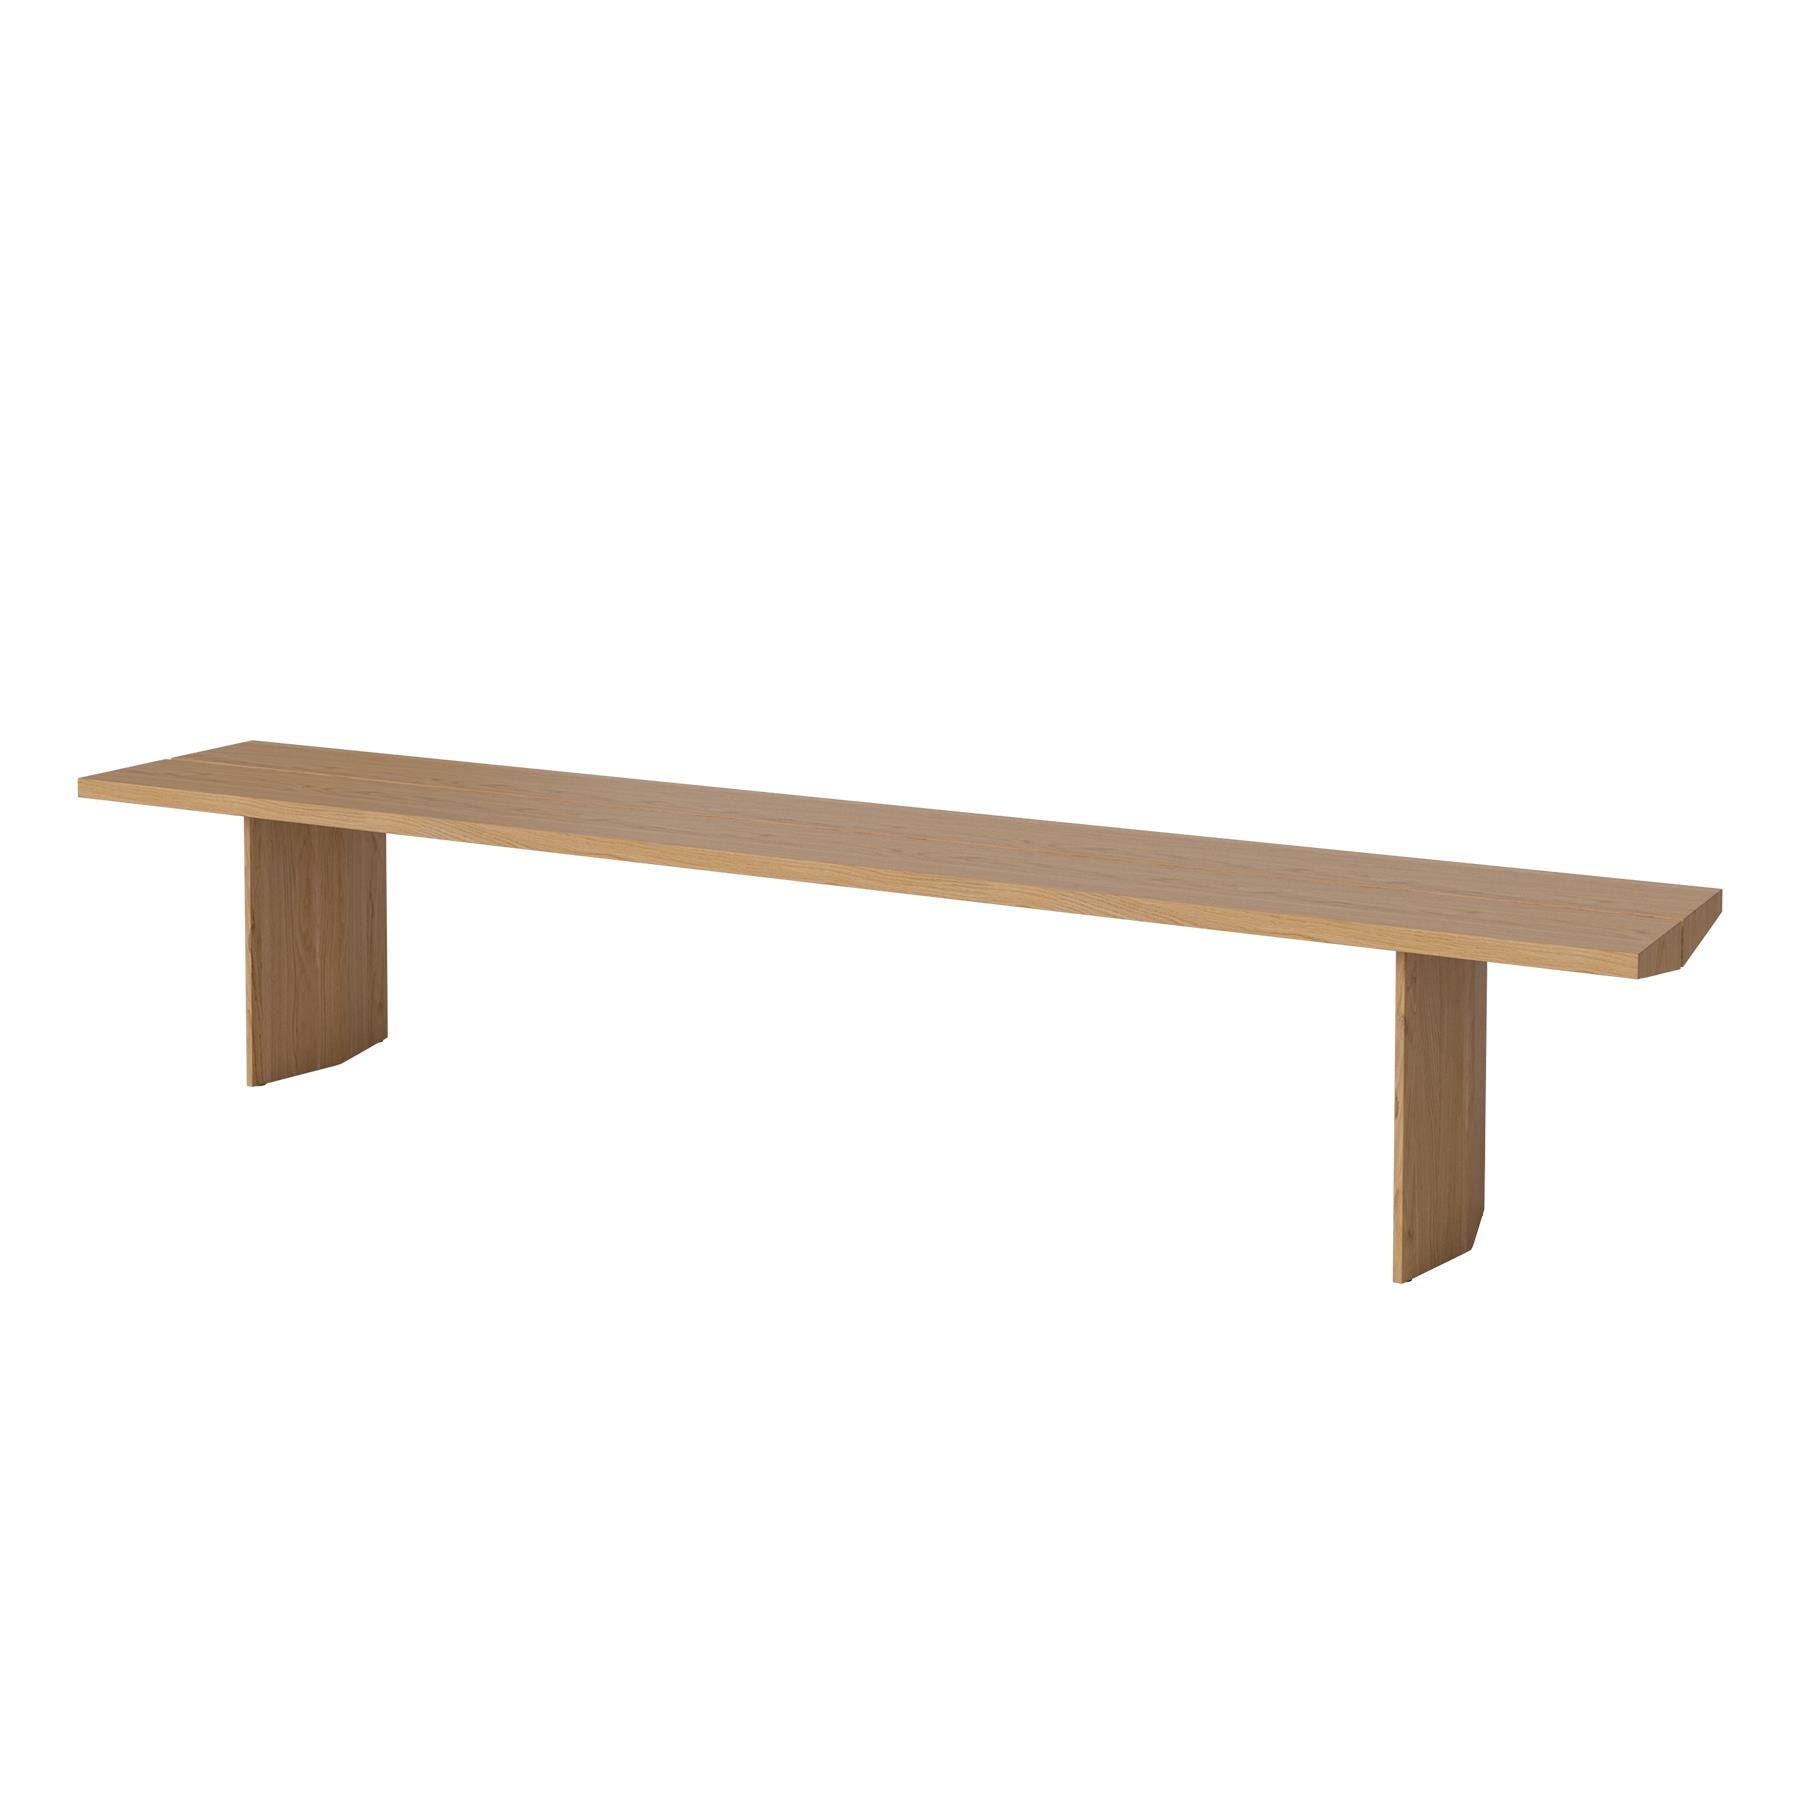 Bolia Alp Dining Bench Oiled Oak Lenghth 240cm Light Wood Designer Furniture From Holloways Of Ludlow